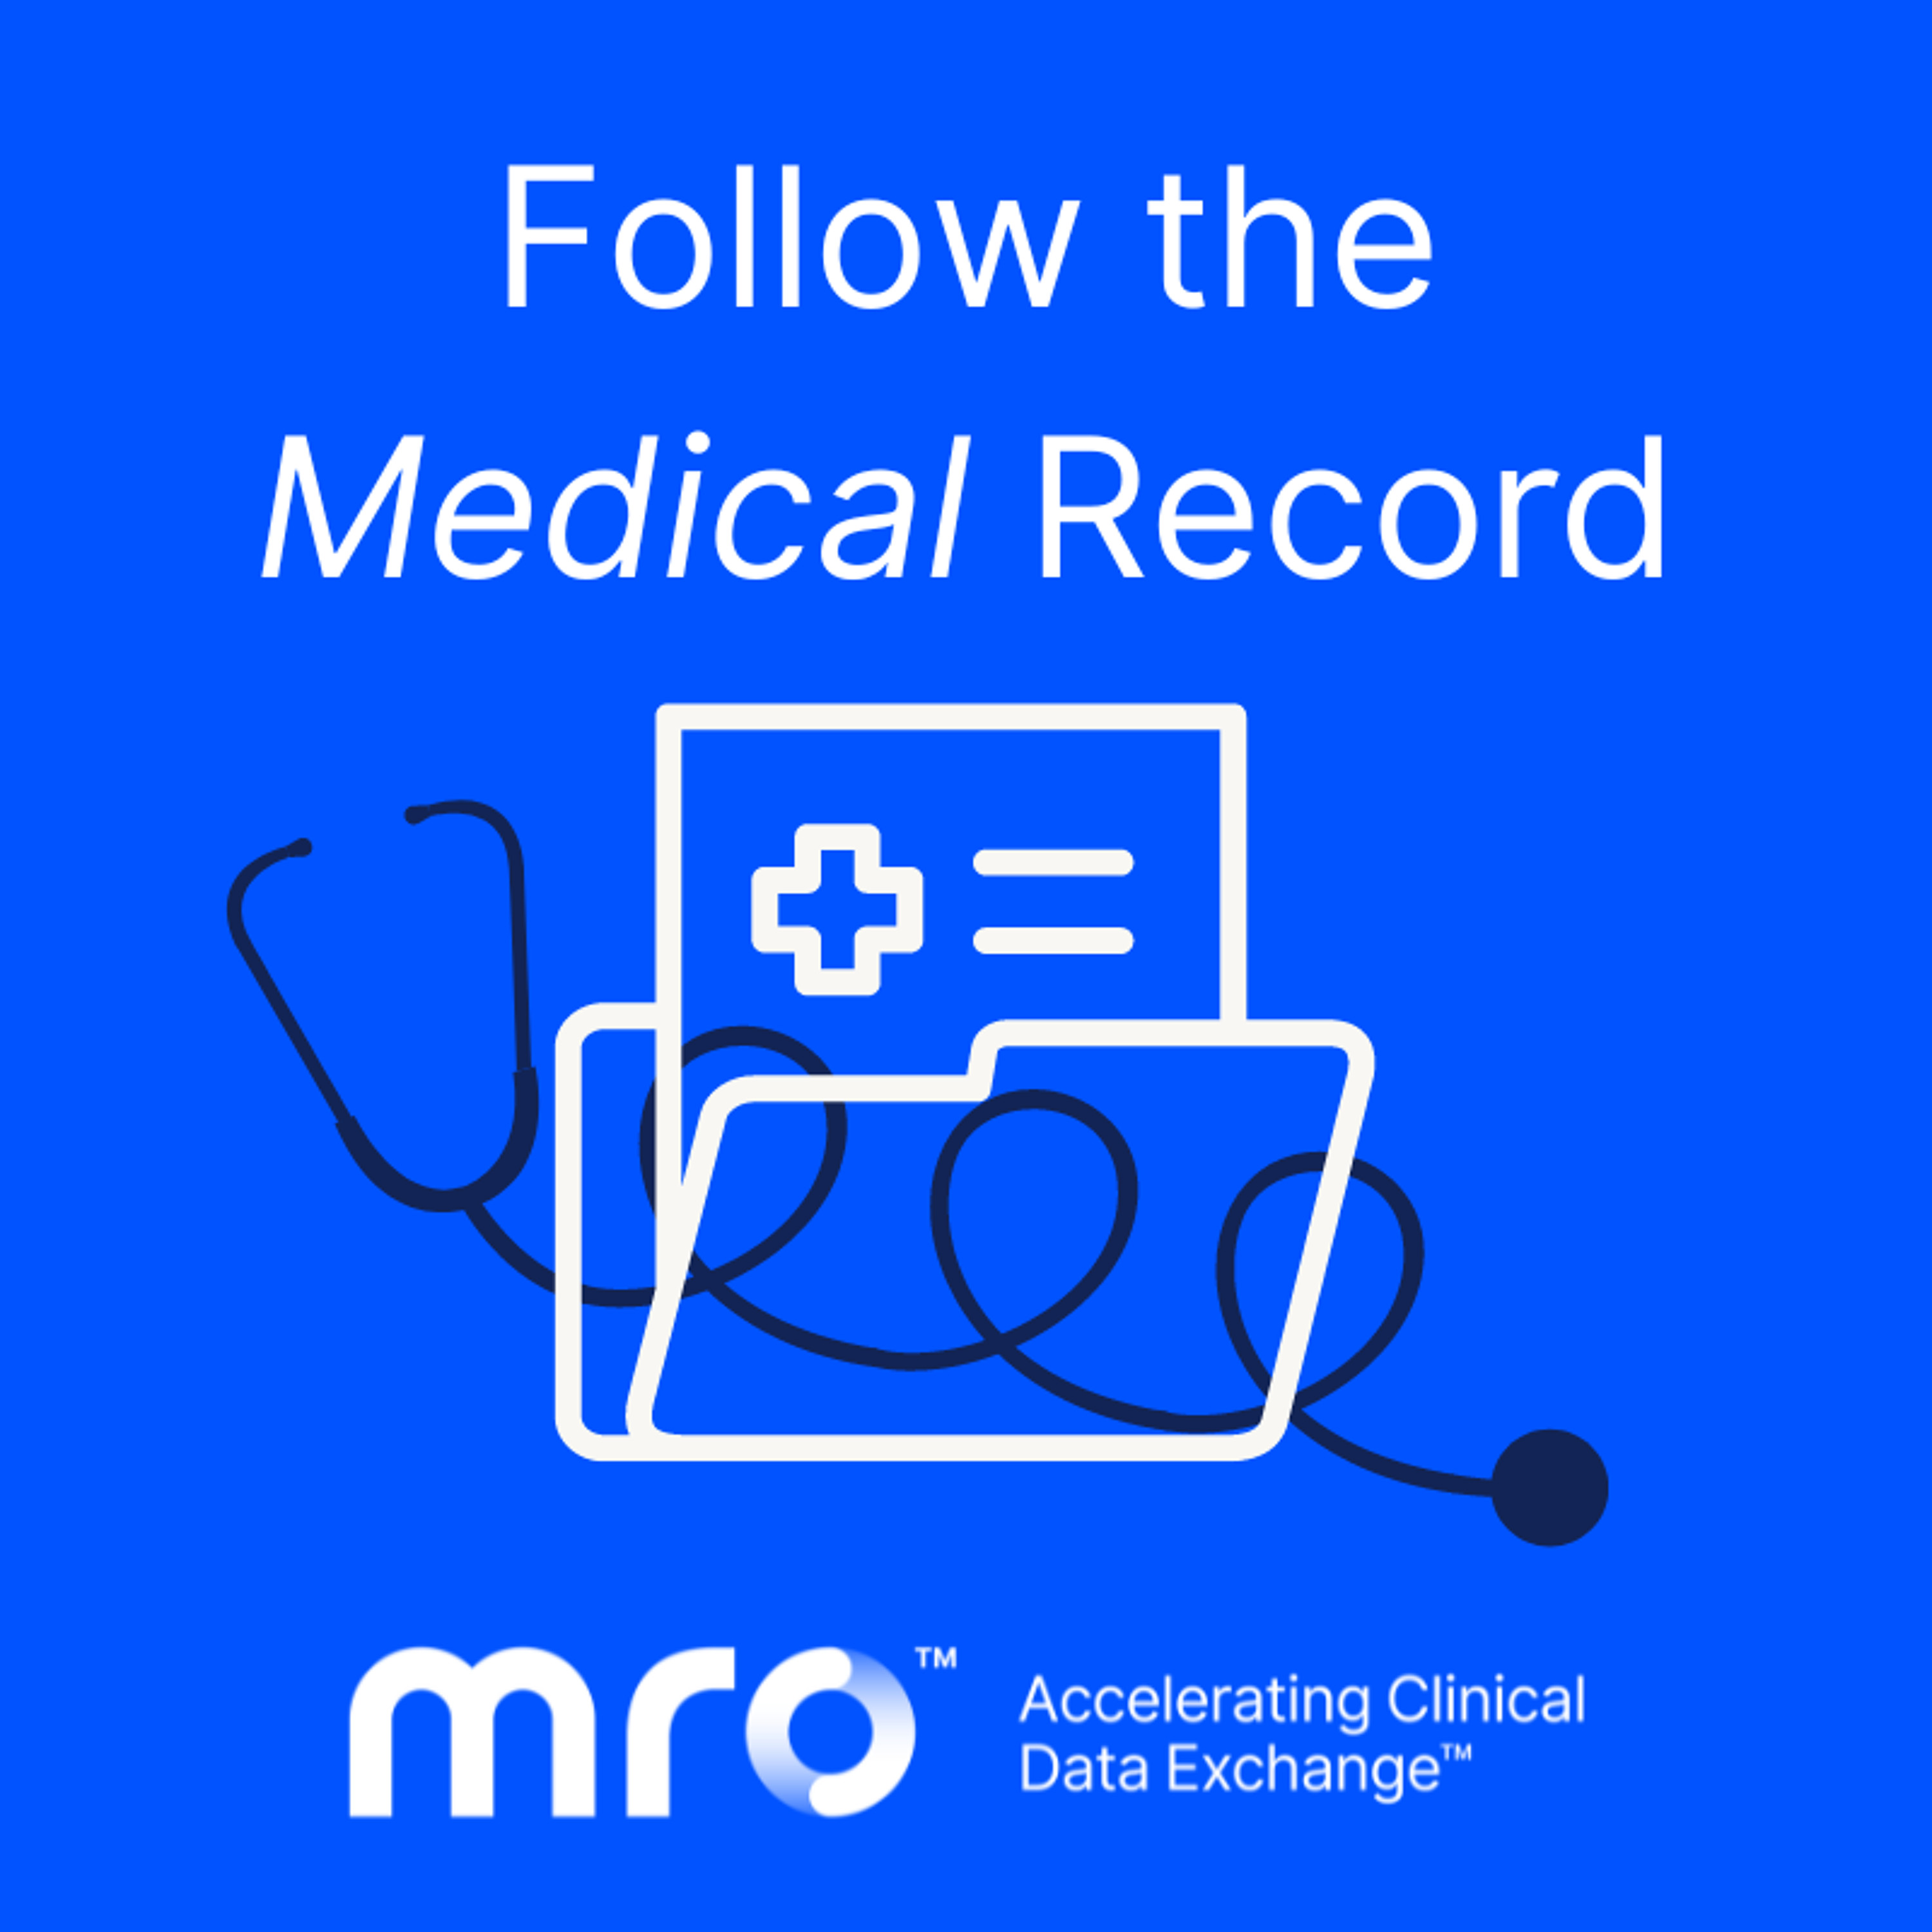 Follow the Medical Record: Matt Wildman and Don discuss the show moving to MRO Exchange